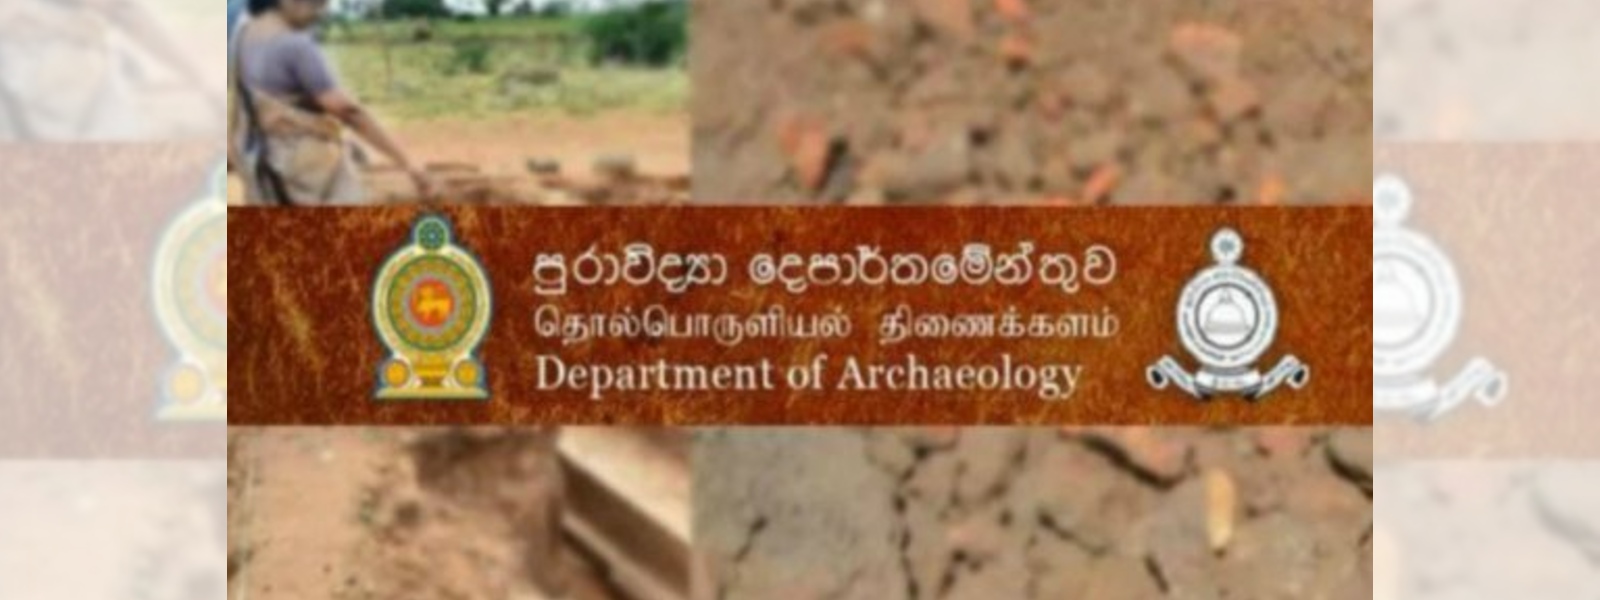 650 Archaeological monuments excavated from Batticaloa